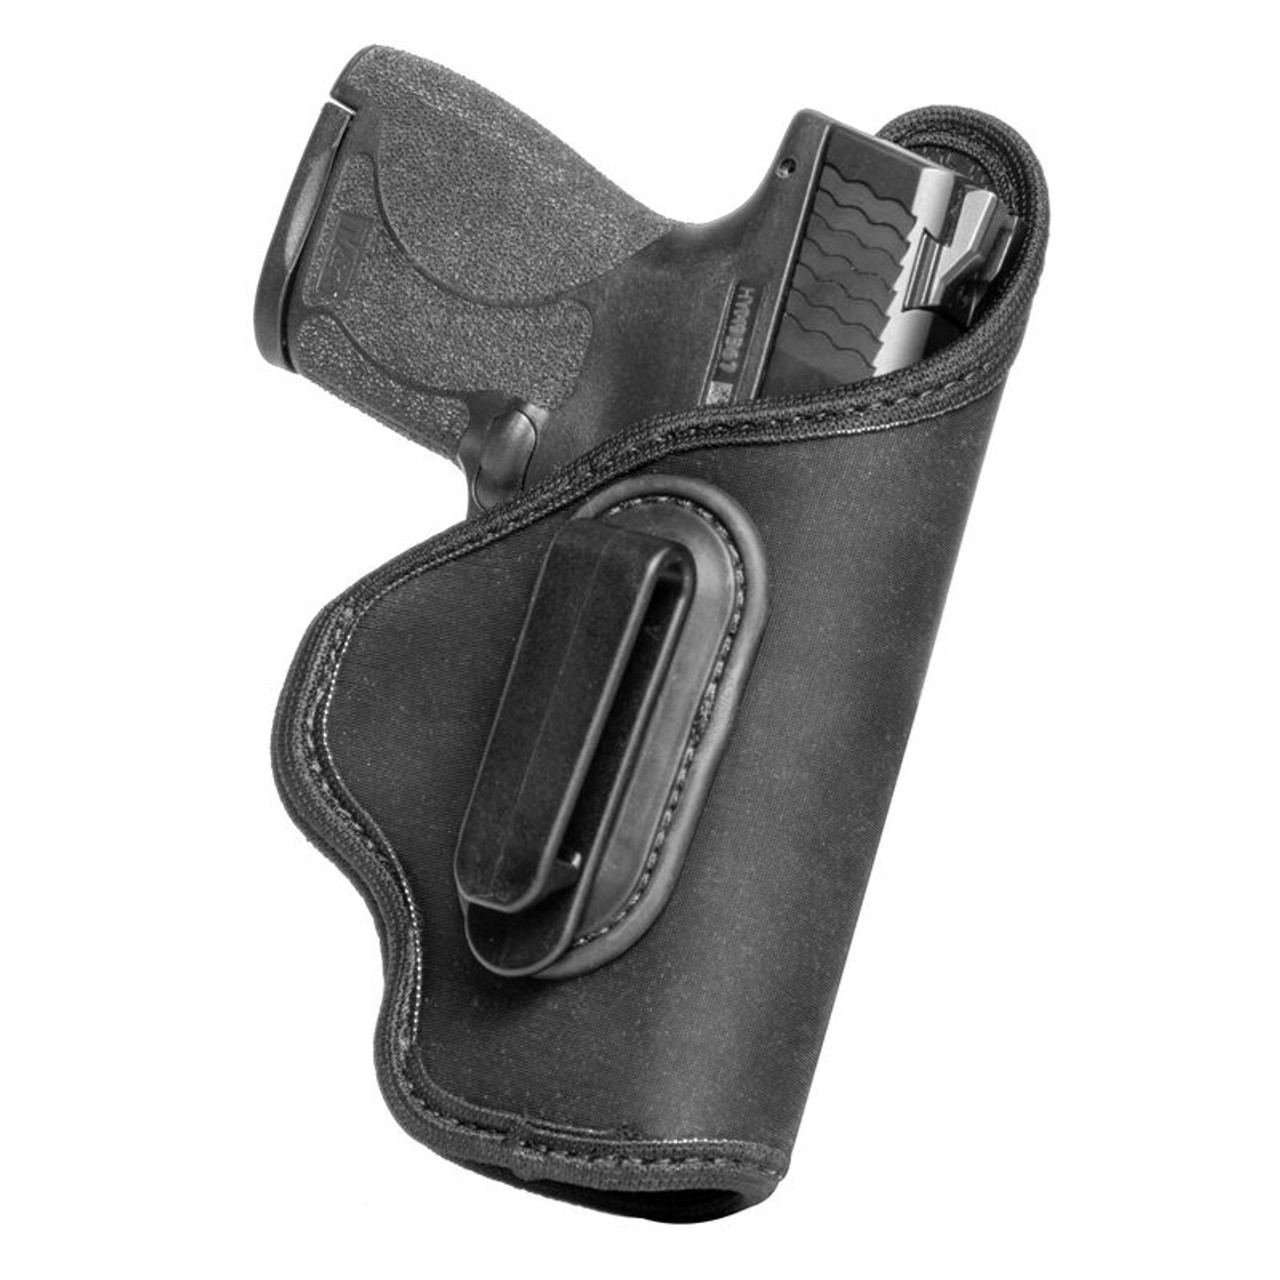 Alien Gear Grip Tuck IWB Holster for Sub-compact Double Stacks [FC 